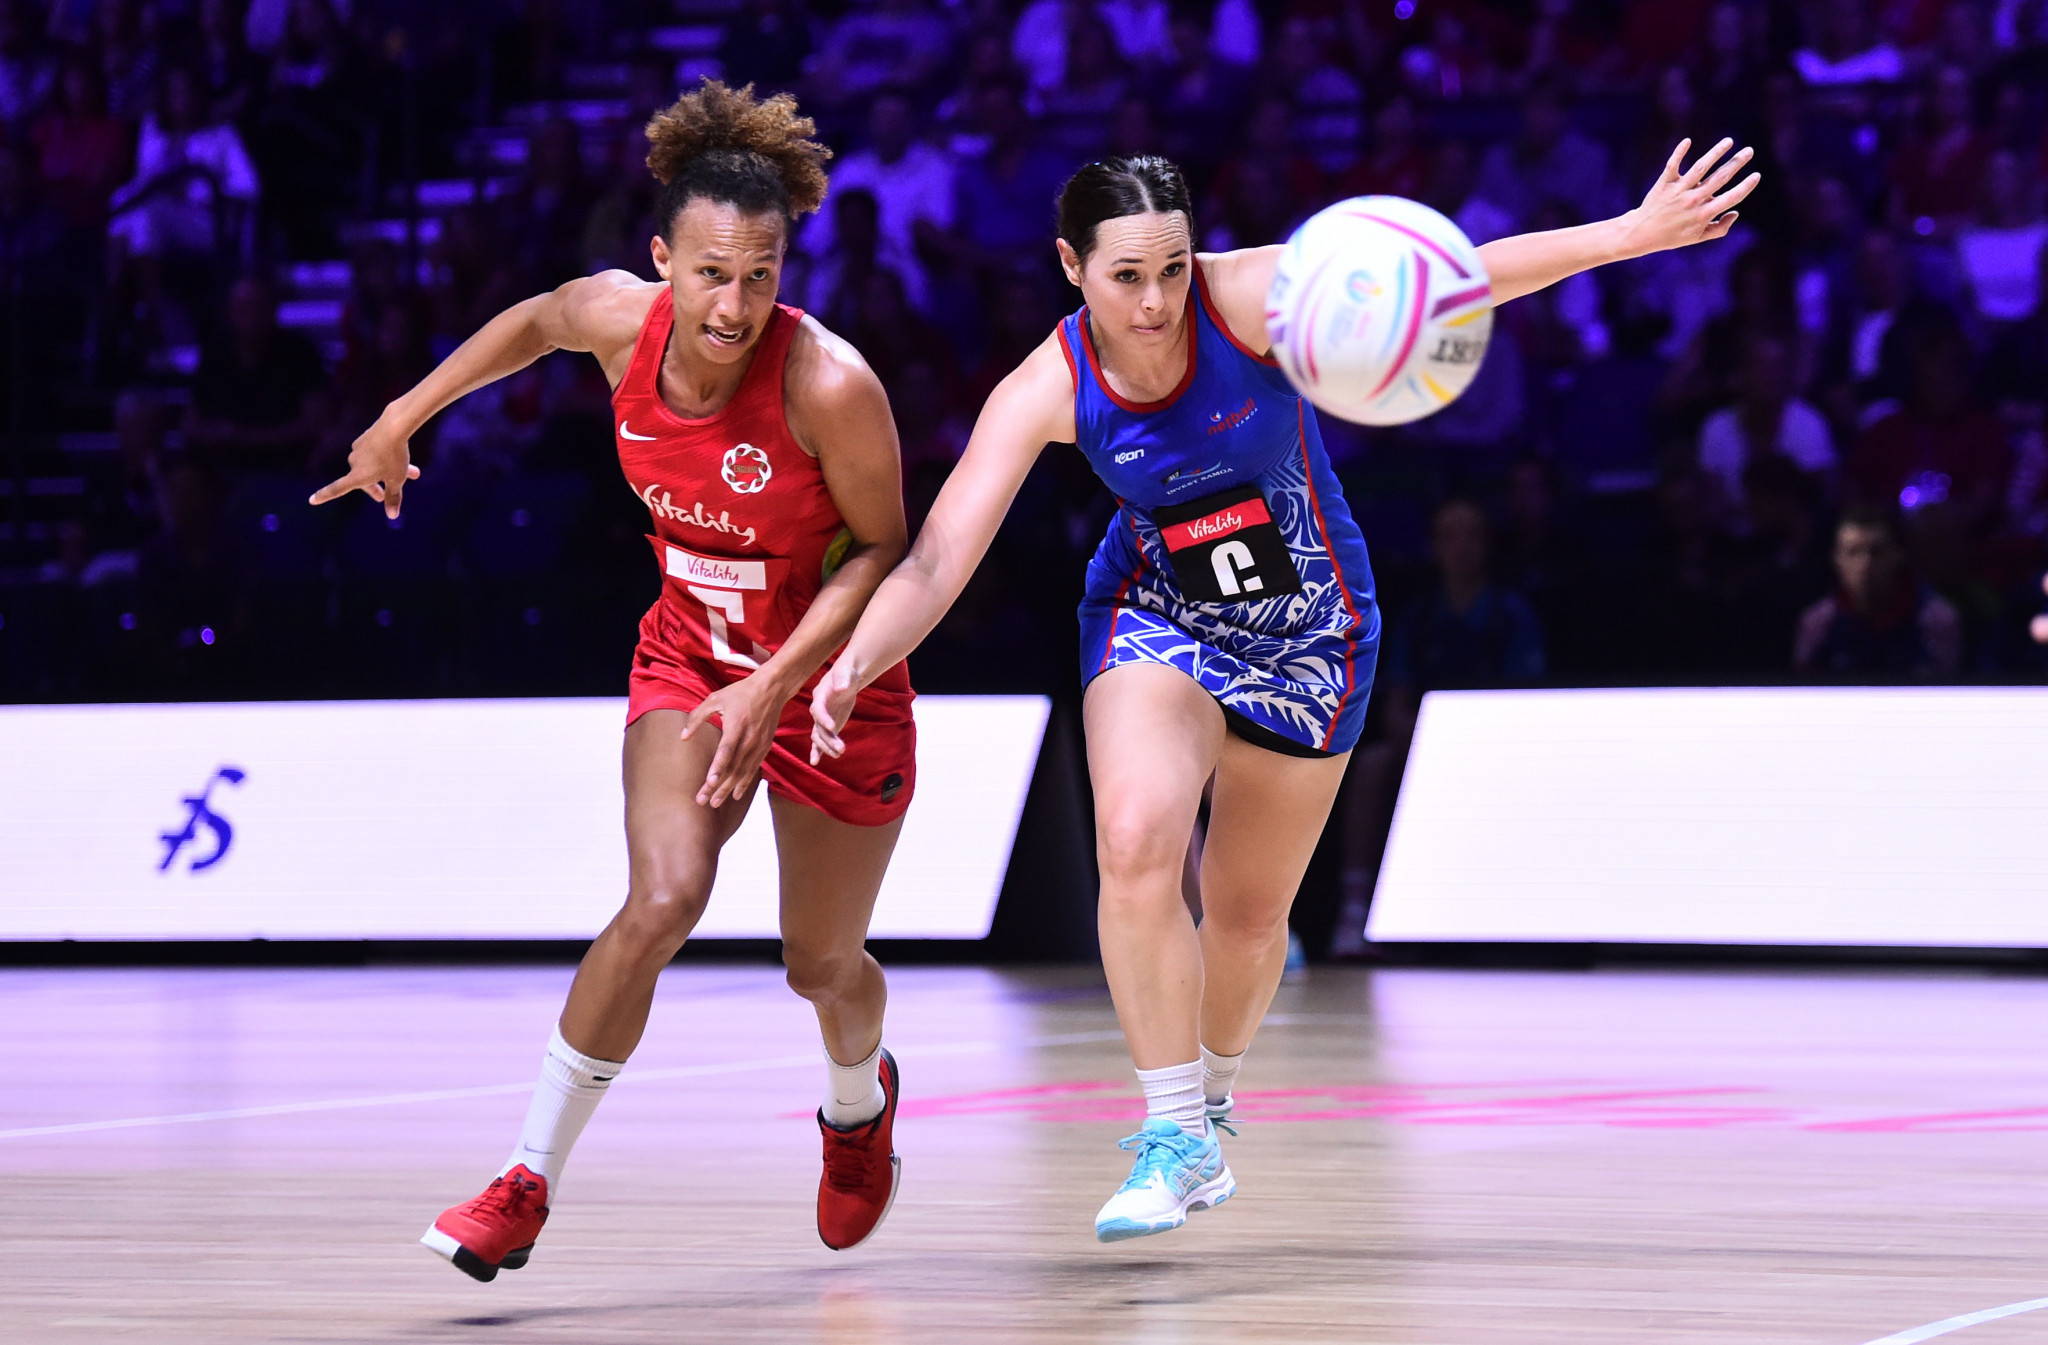 England thrashed Samoa 90-24 to finish top of Group D at the Netball World Cup in Liverpool ©Getty Images